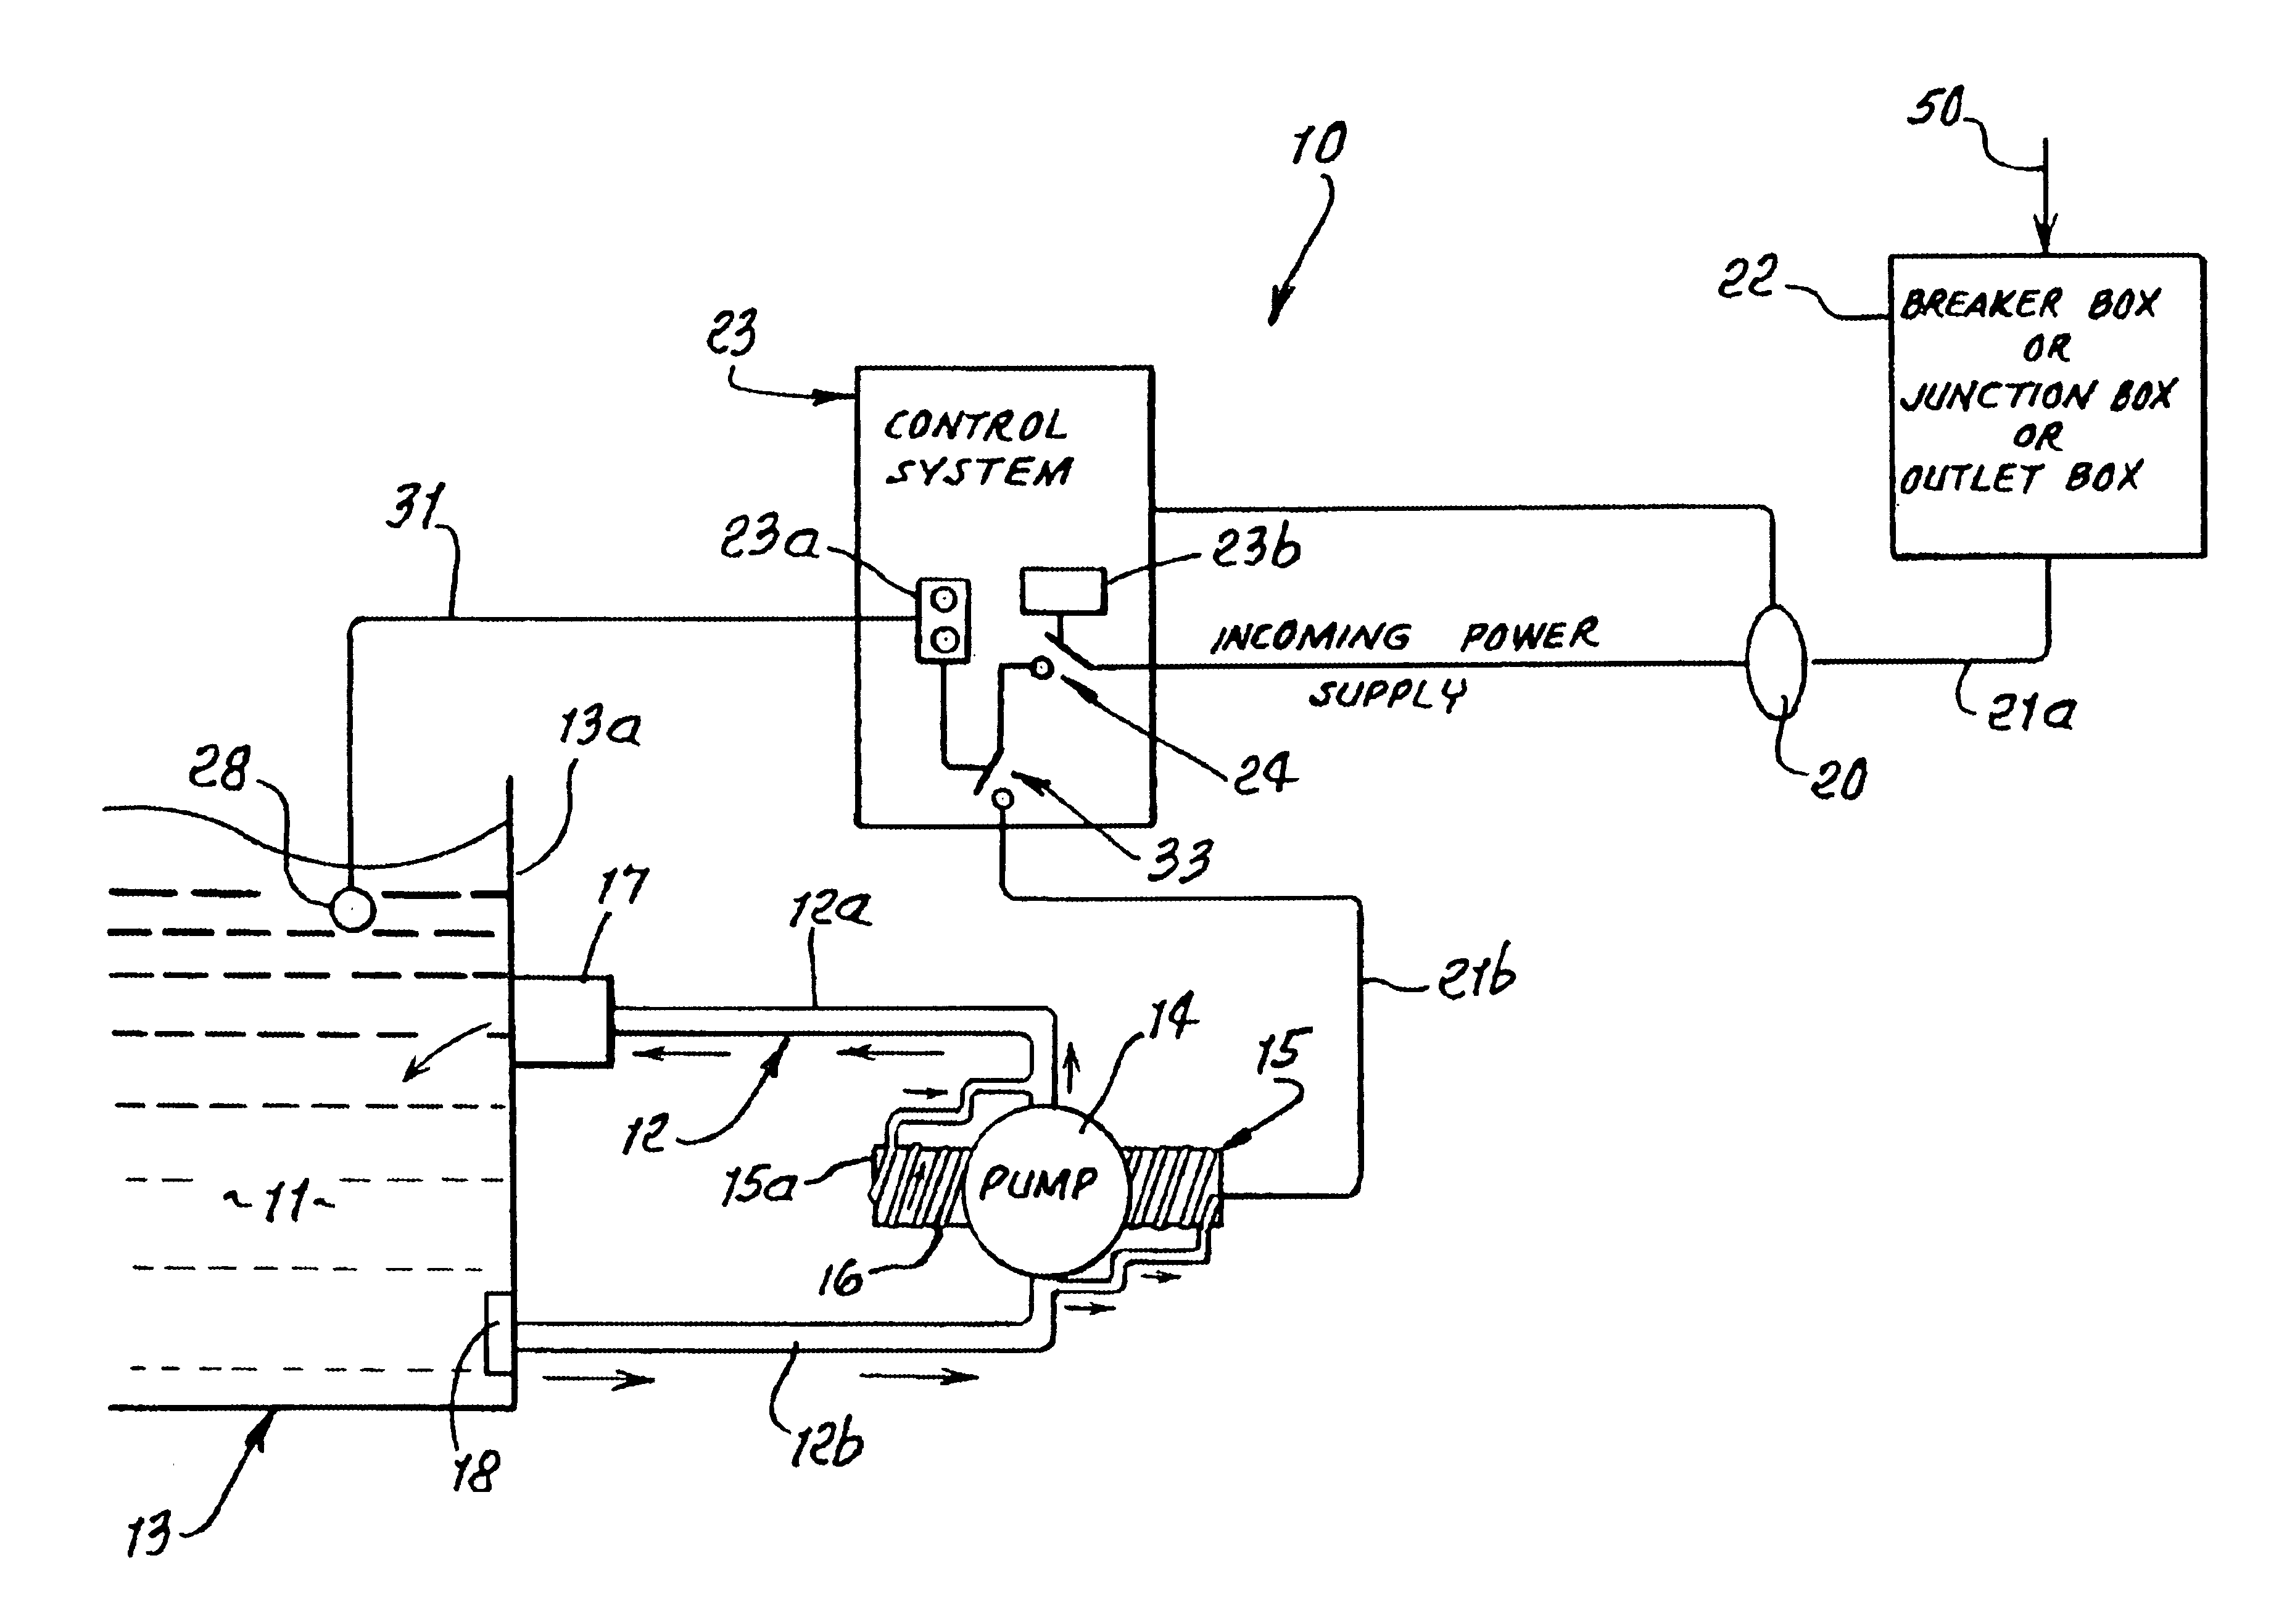 Method and means for controlling electrical distribution